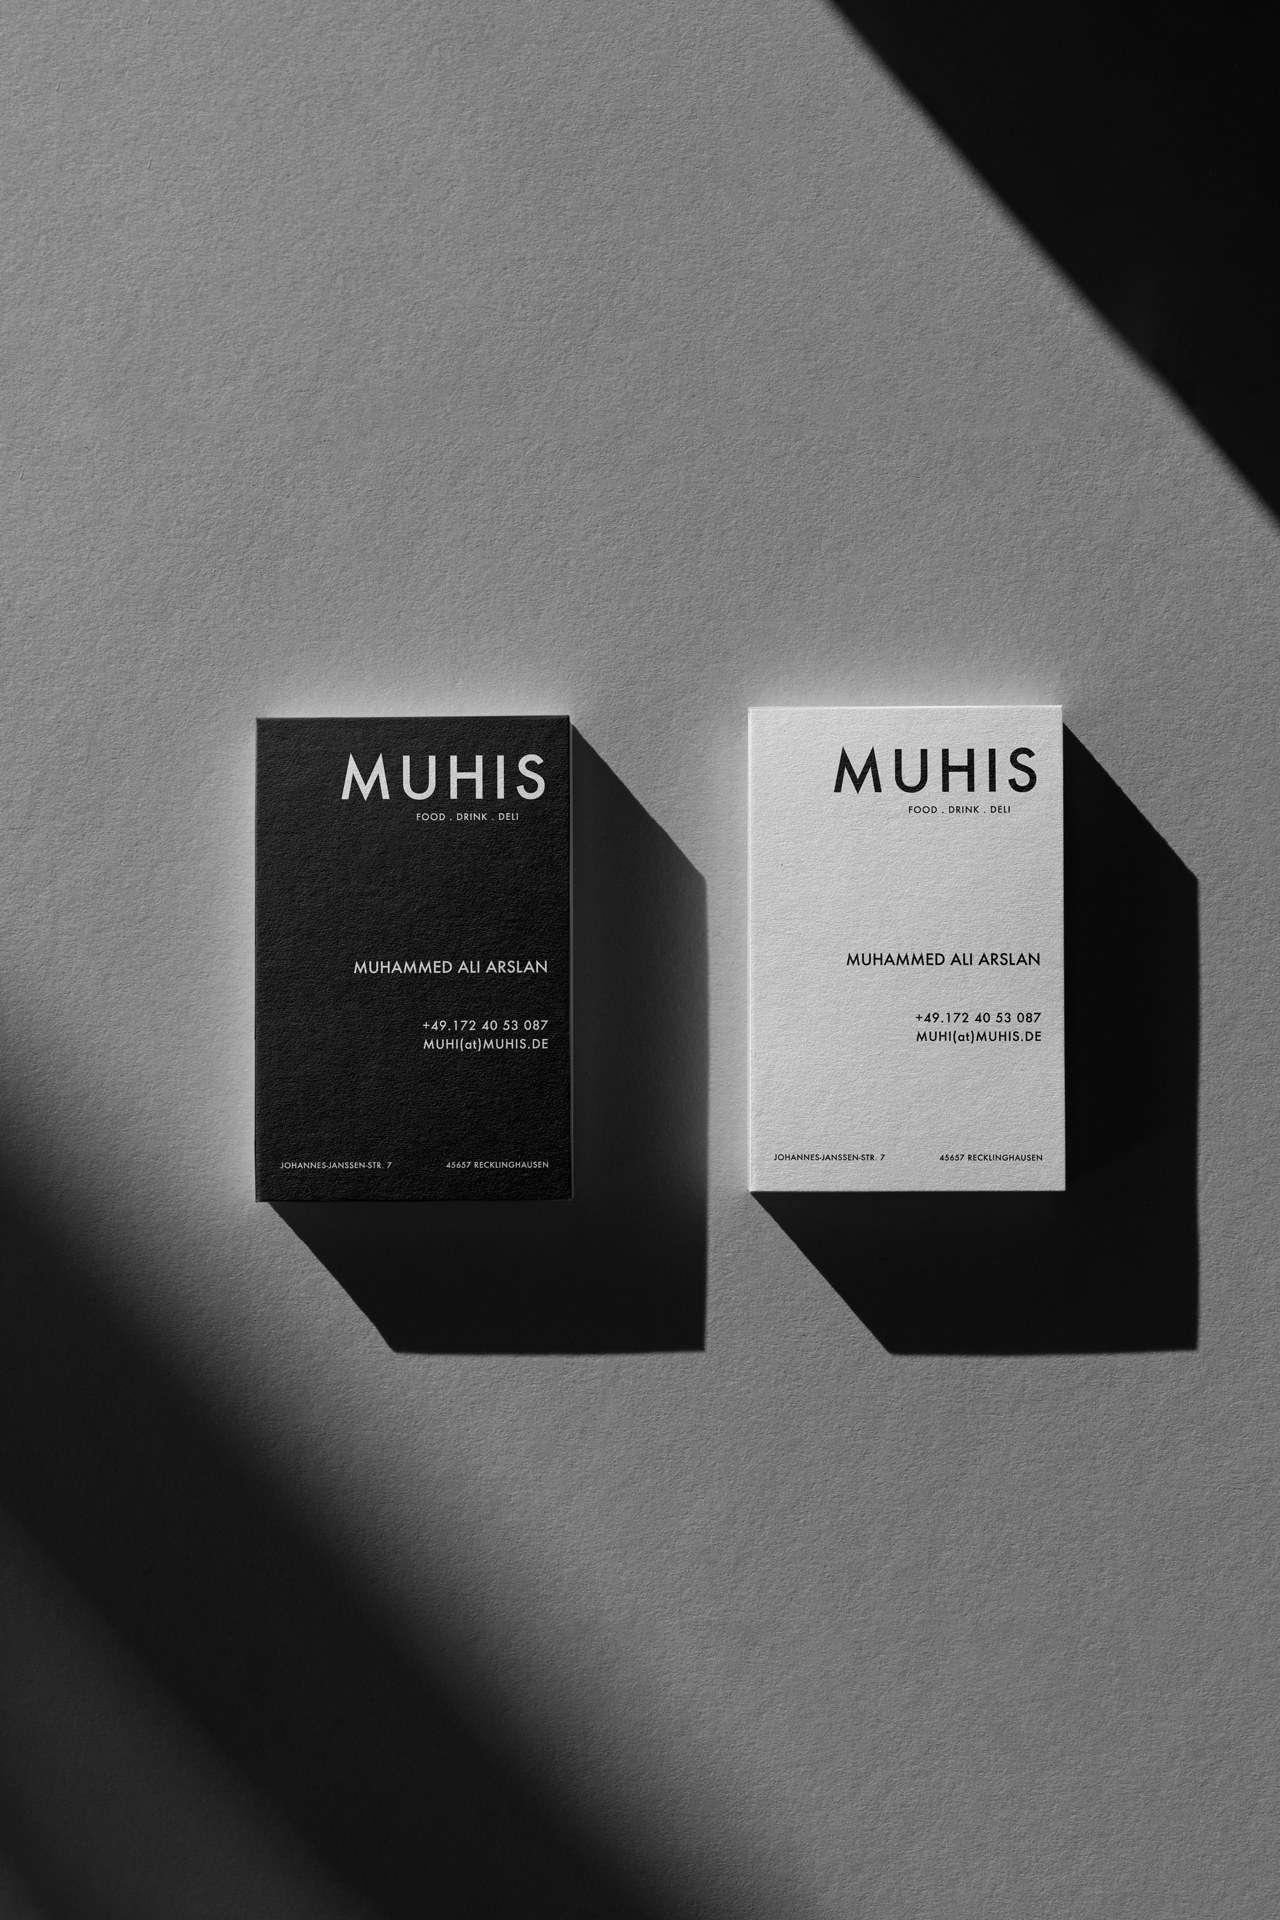 muhis_cup_business_cards